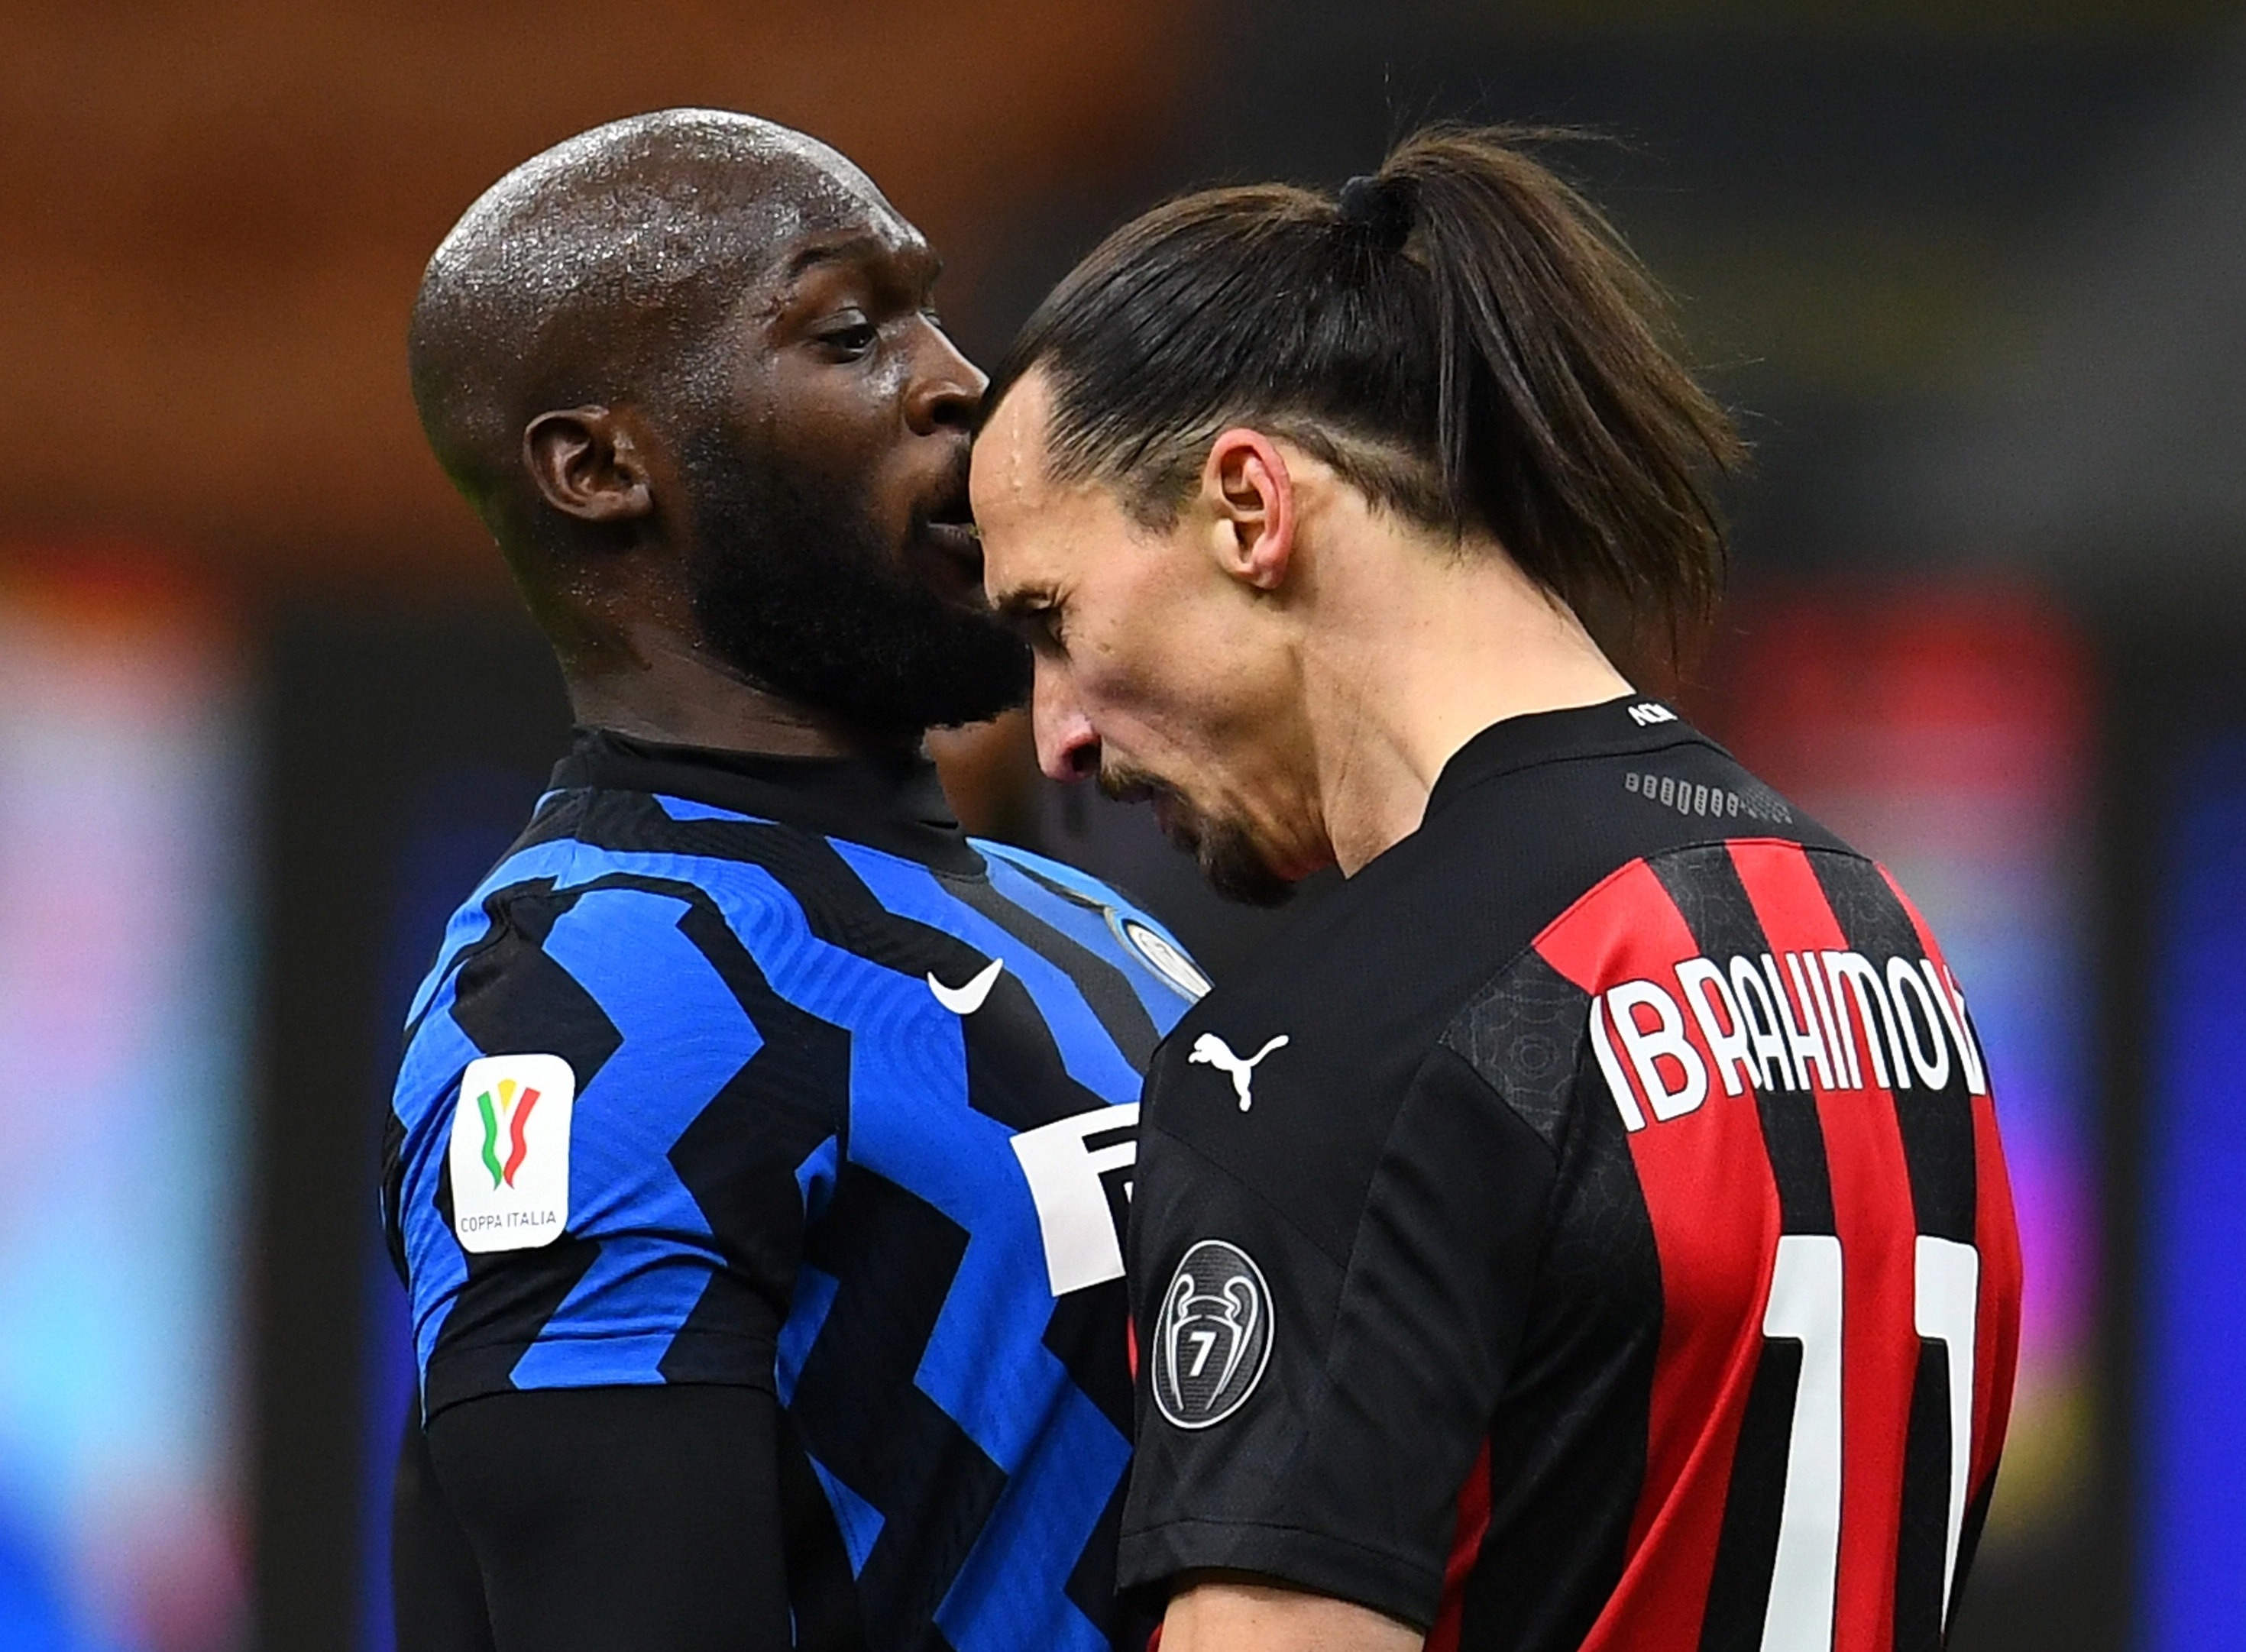 Romelu Lukaku, here clashing with Ibrahimovic, is another tipped for boxing potential